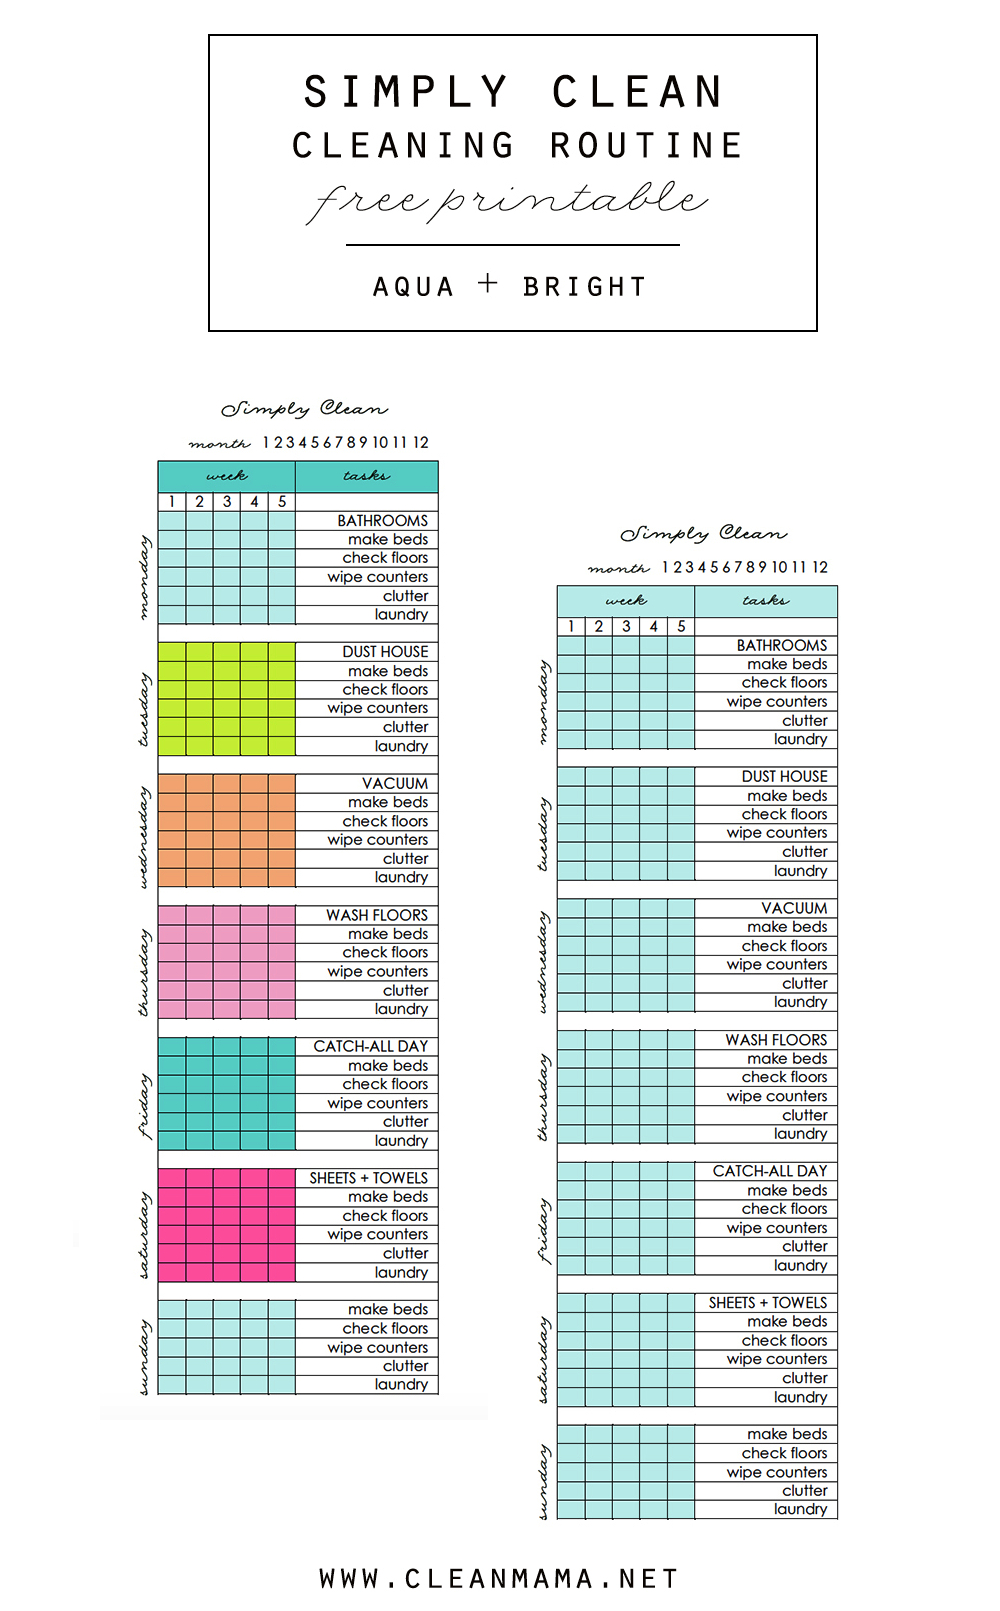 Simply Clean Cleaning Routine At A Glance Free Printable - Clean Mama - Free Printable Cleaning Schedule